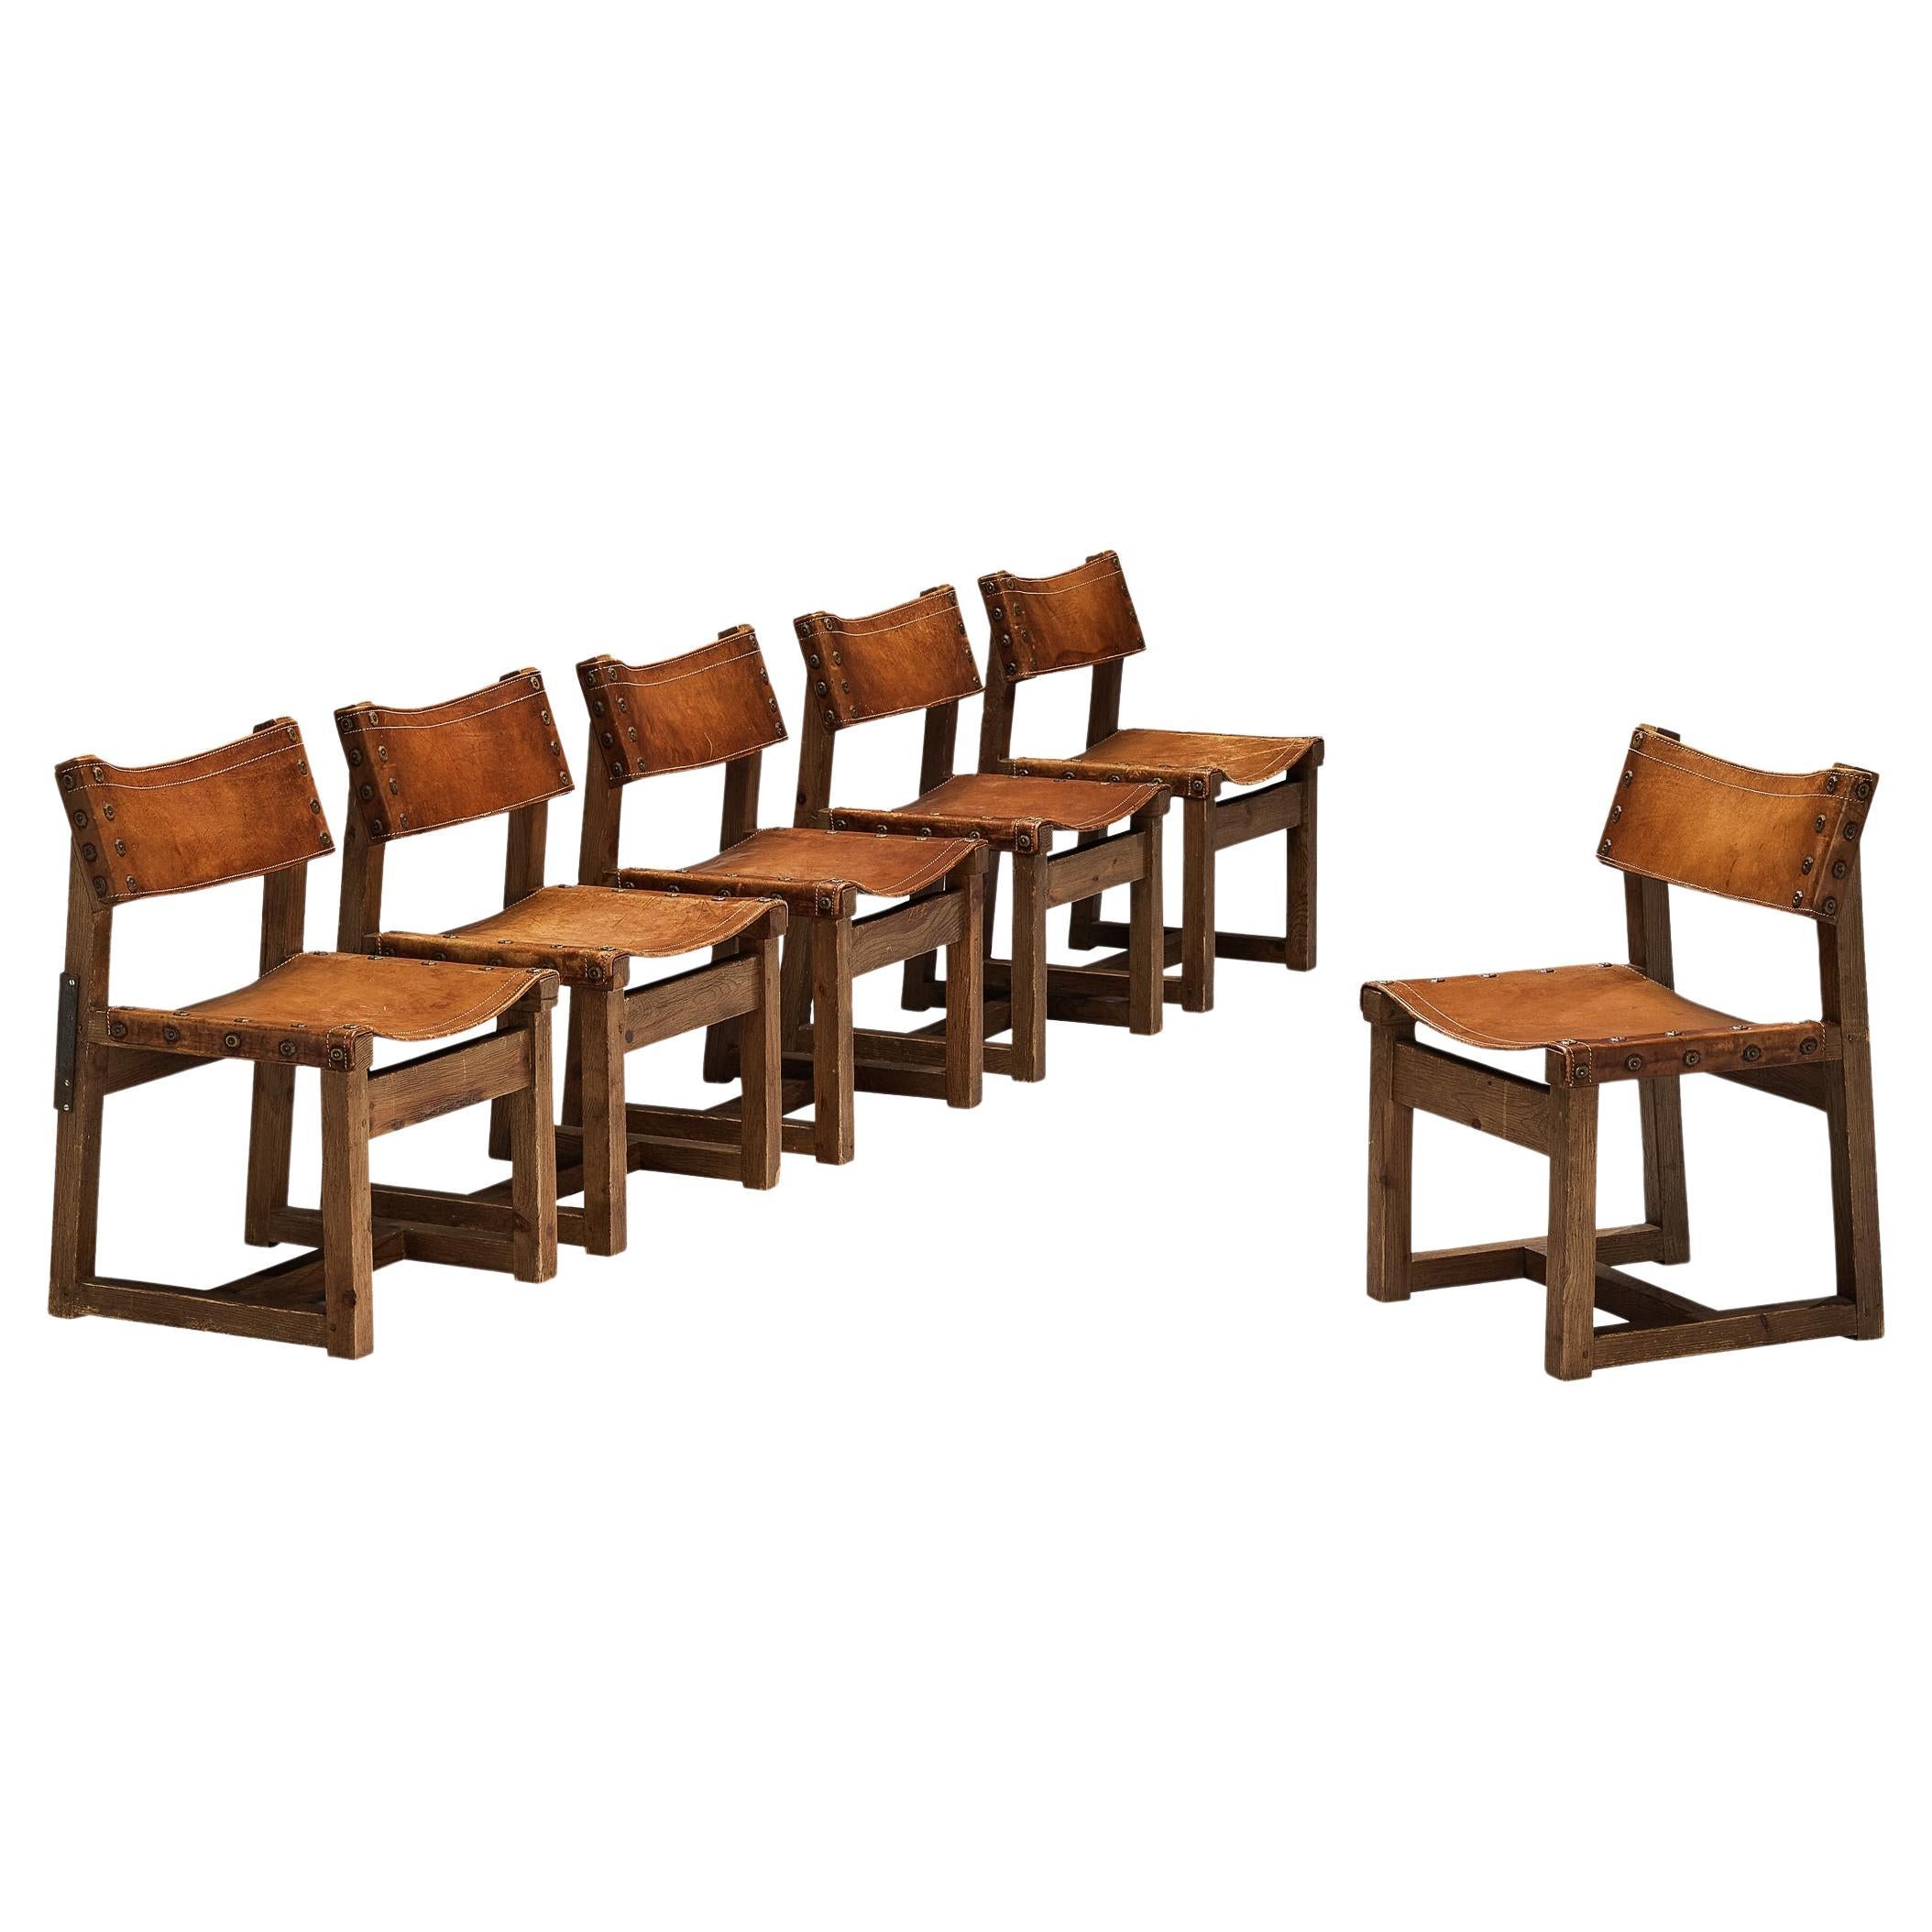 Biosca Brutalist Spanish Dining Chairs in Leather and Oak 